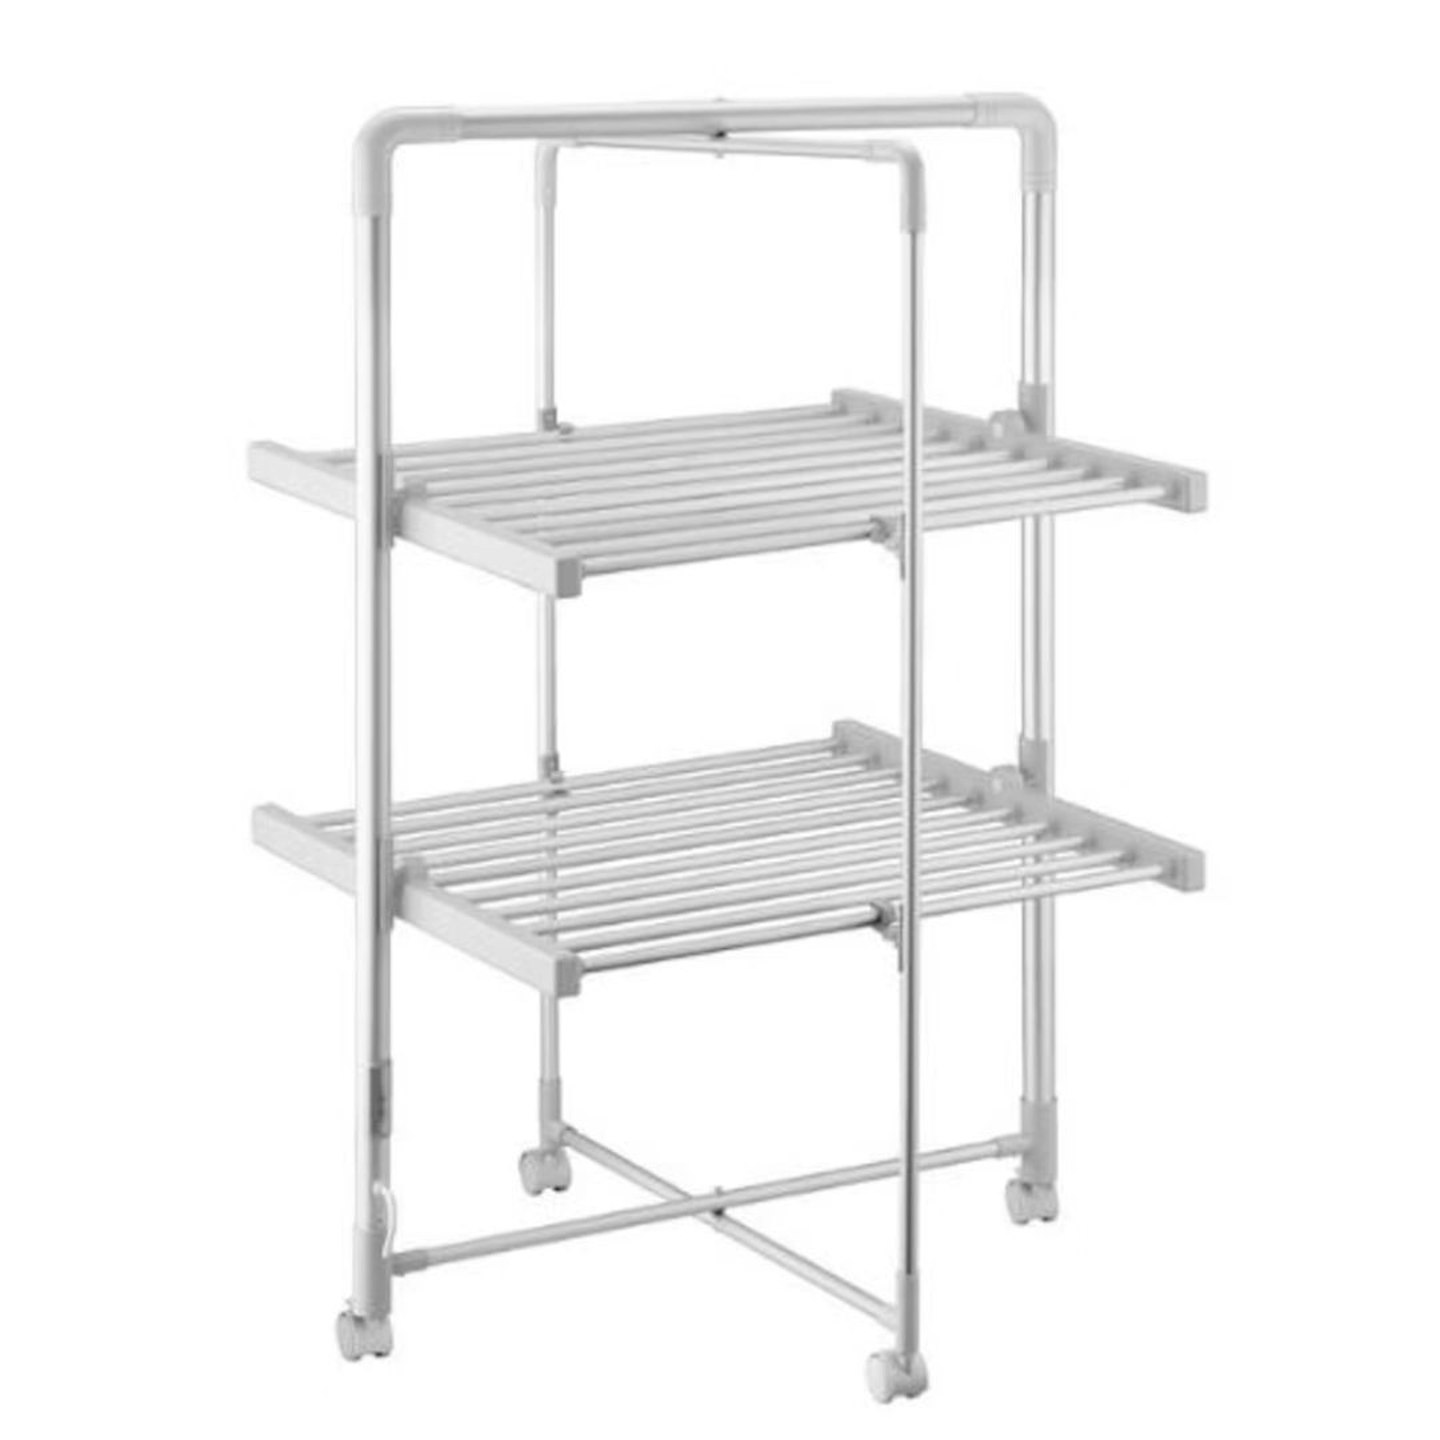 https://images.bauerhosting.com/affiliates/sites/9/2023/10/Easylife_2-Tier_Heated_Airer_with_Timer.jpg?auto=format&w=1440&q=80